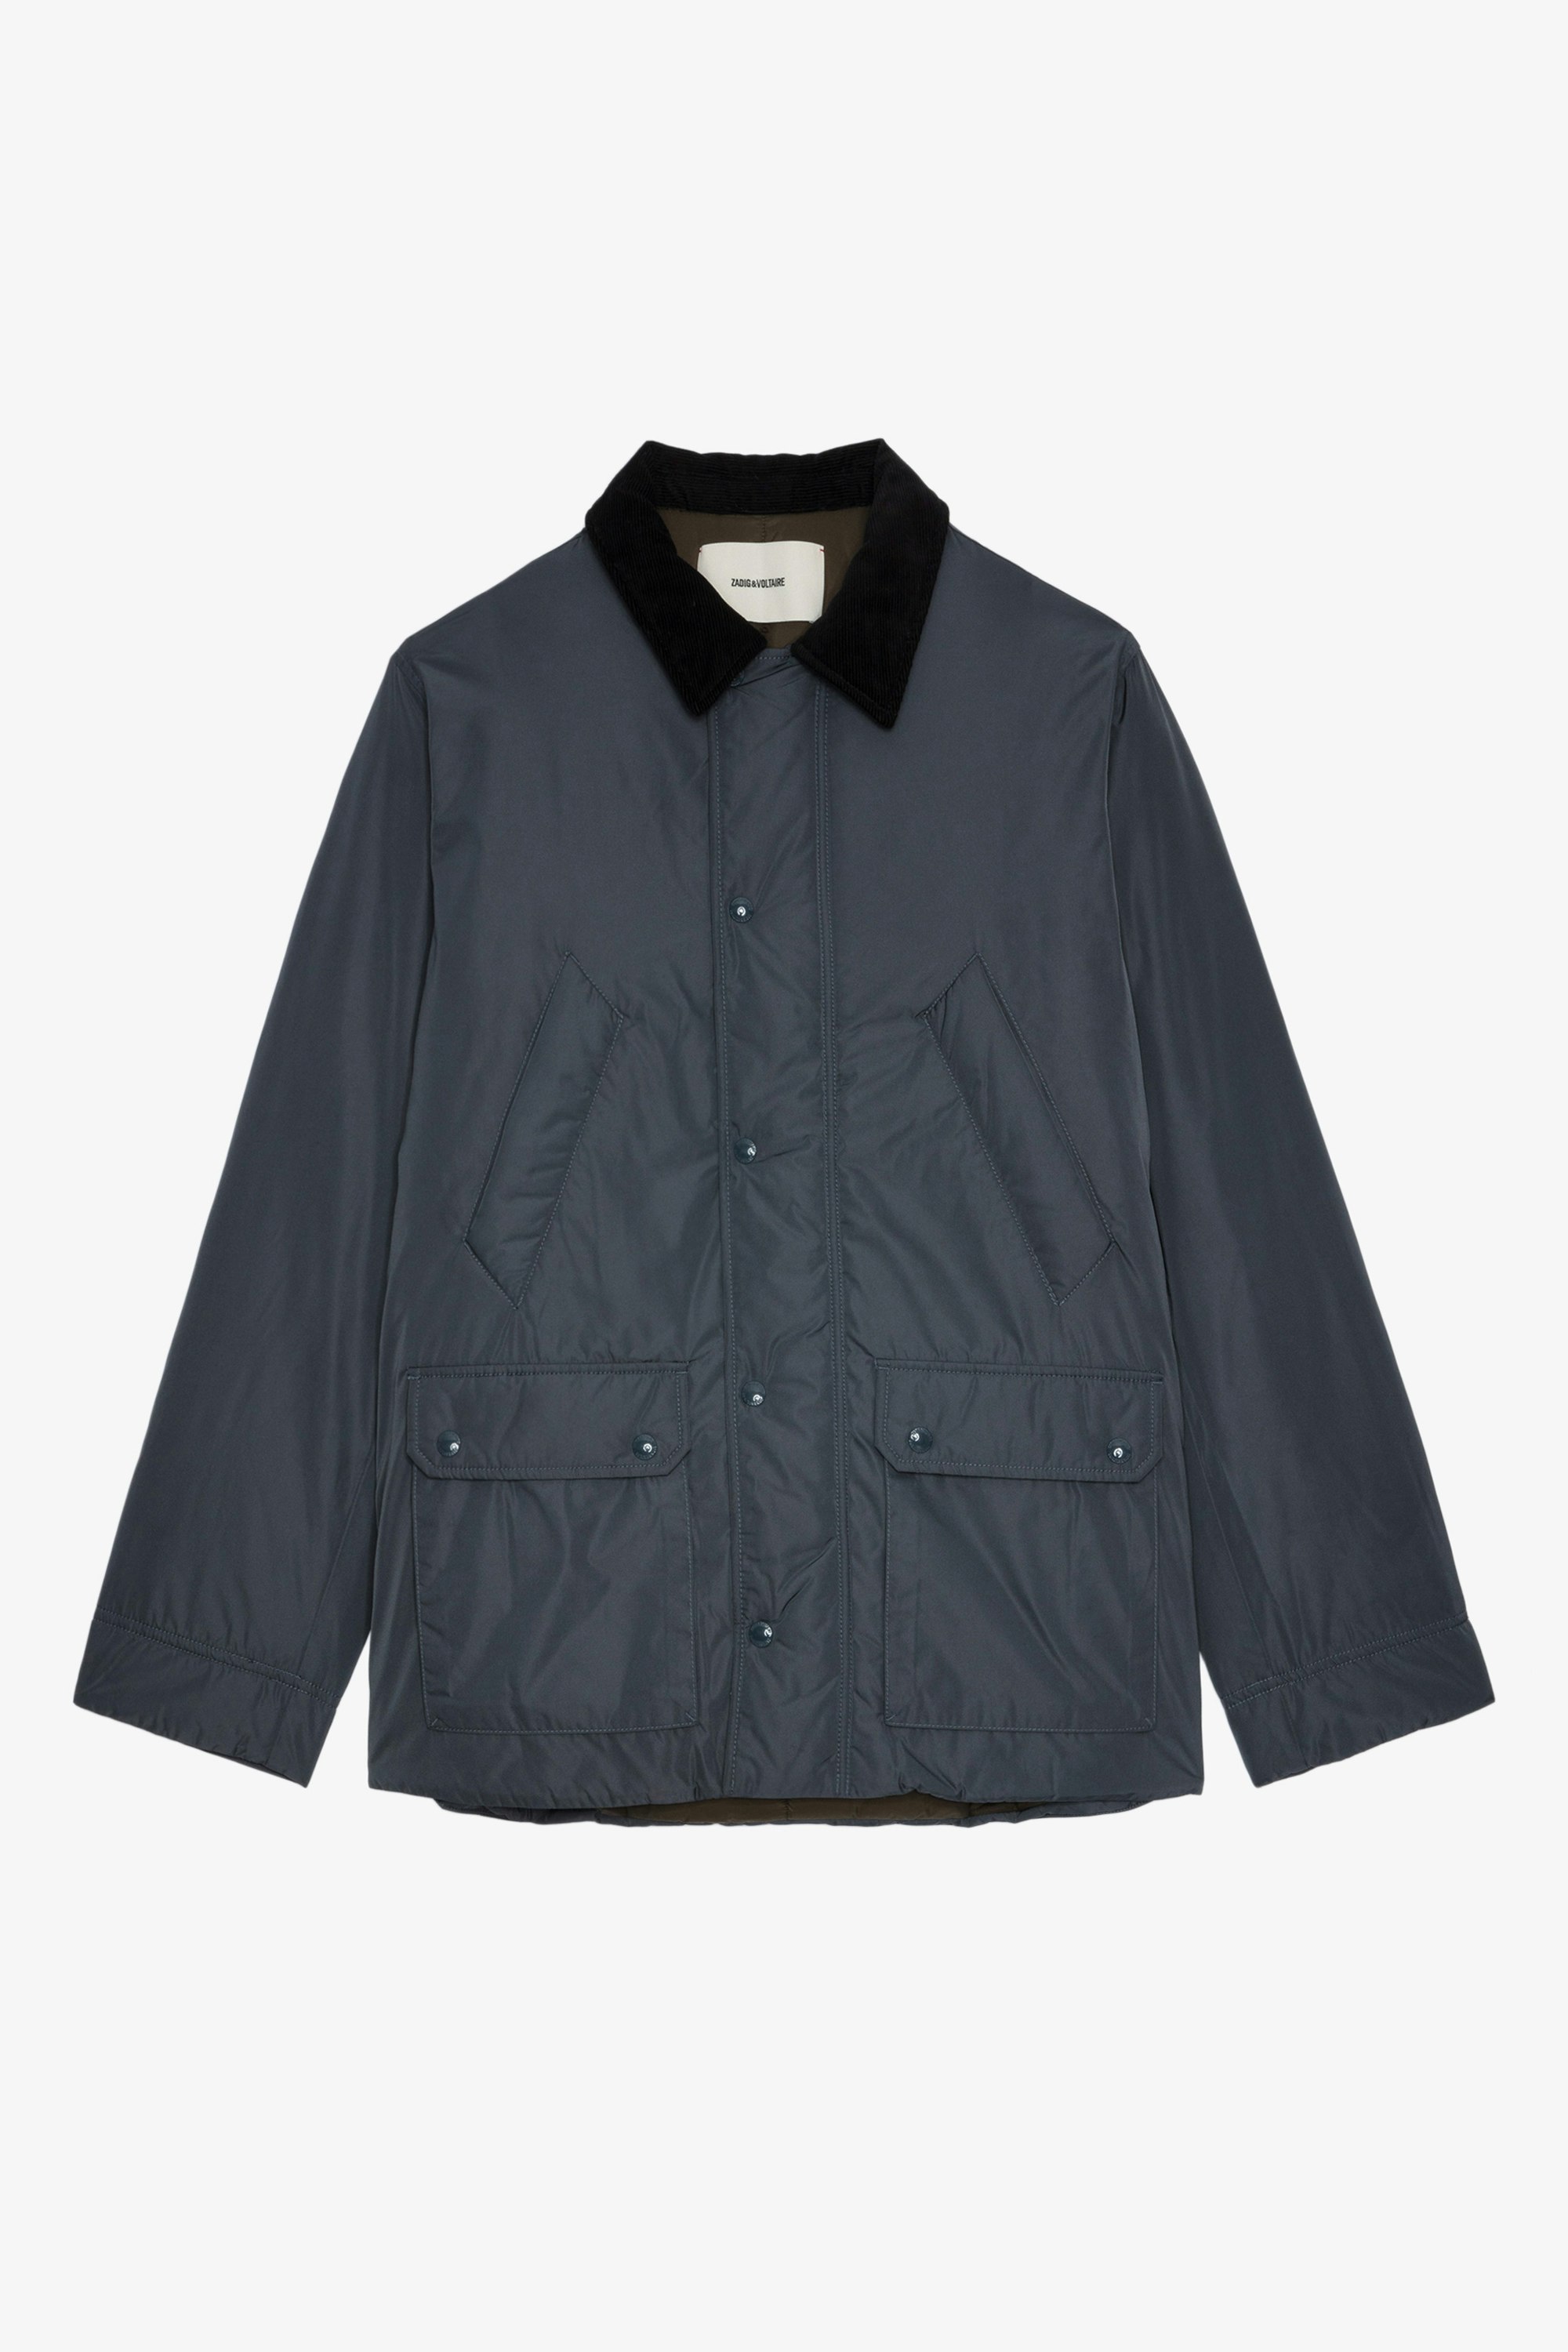 Bertie Jacket - Men’s anthracite nylon jacket with contrasting neck and studio insignia on back.